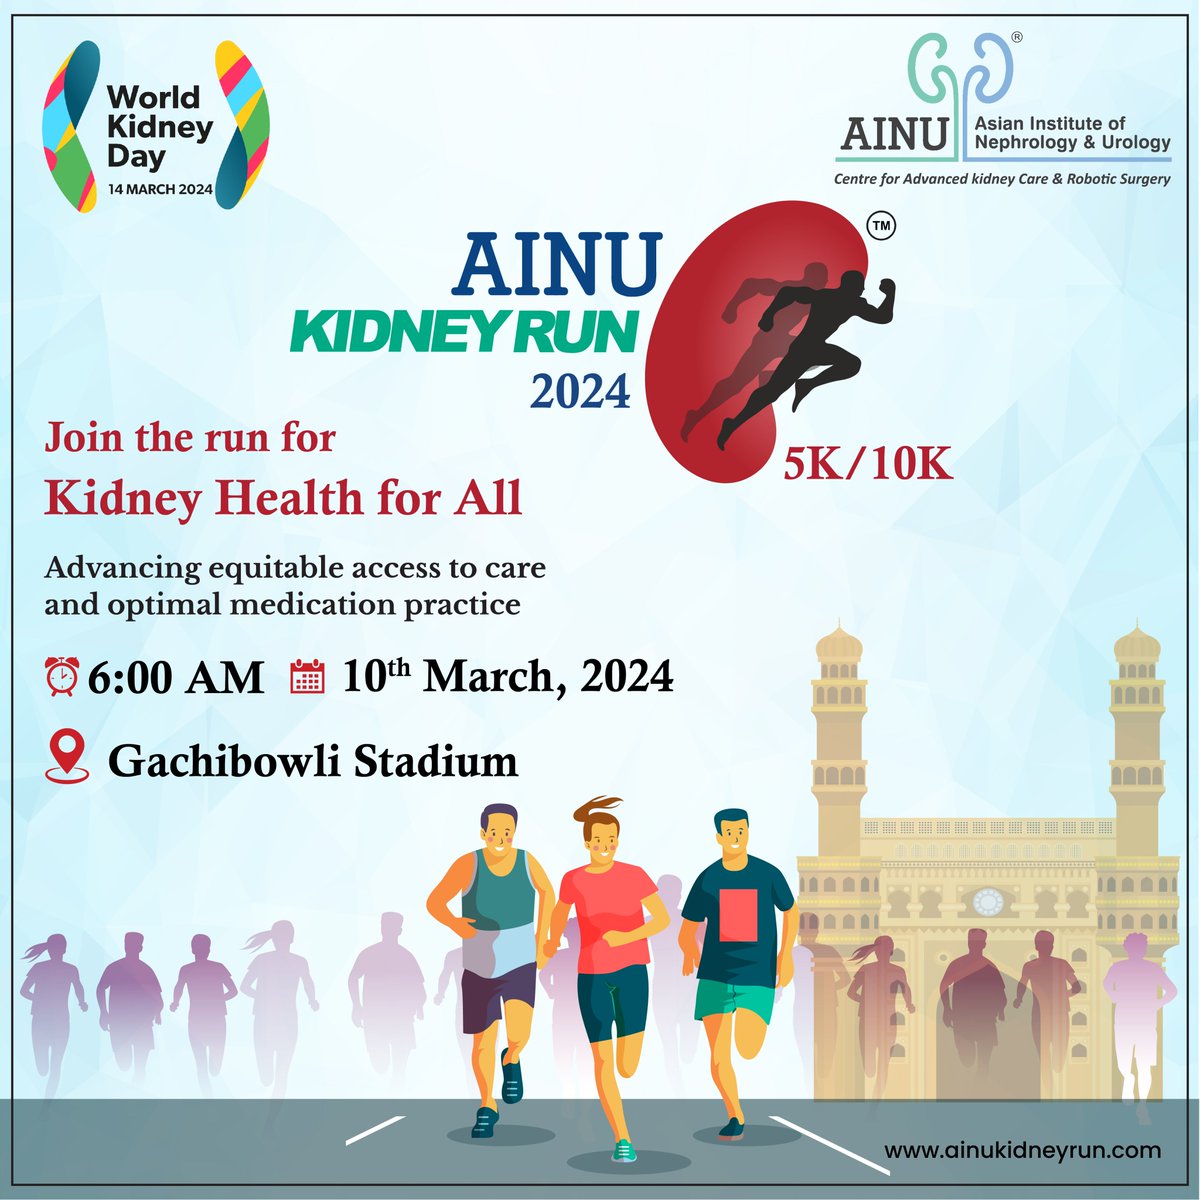 🏃‍♂️🏃‍♀️ Get ready to lace up your running shoes because AINU Kidney Run is BACK for its 4th edition! 🌟 Save the date - March 10th, 2024! 📅 👟 This year, we're gearing up for an even more exciting event, and we want YOU to be part of it! 🌈 Stay tuned for the registrations details